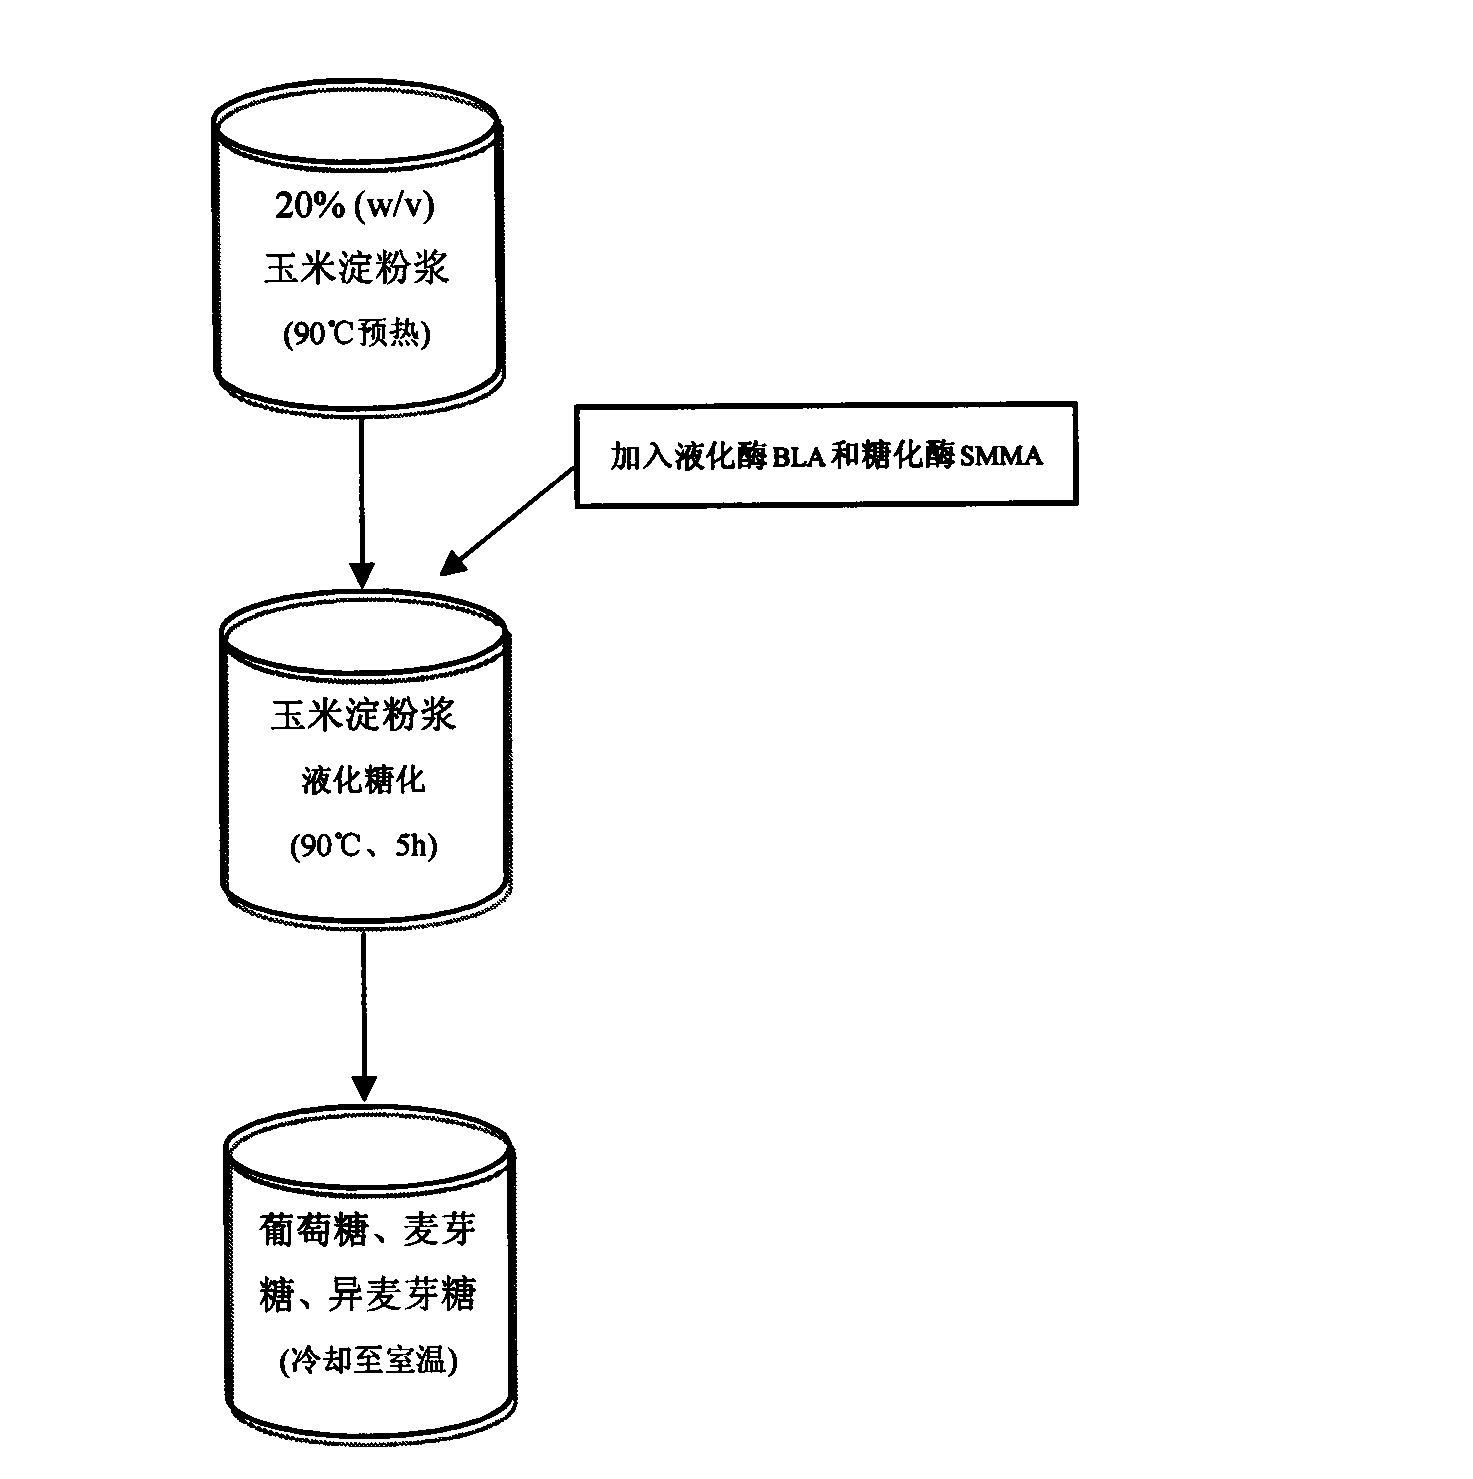 Method of simultaneously liquefying and saccharifying cirn starch